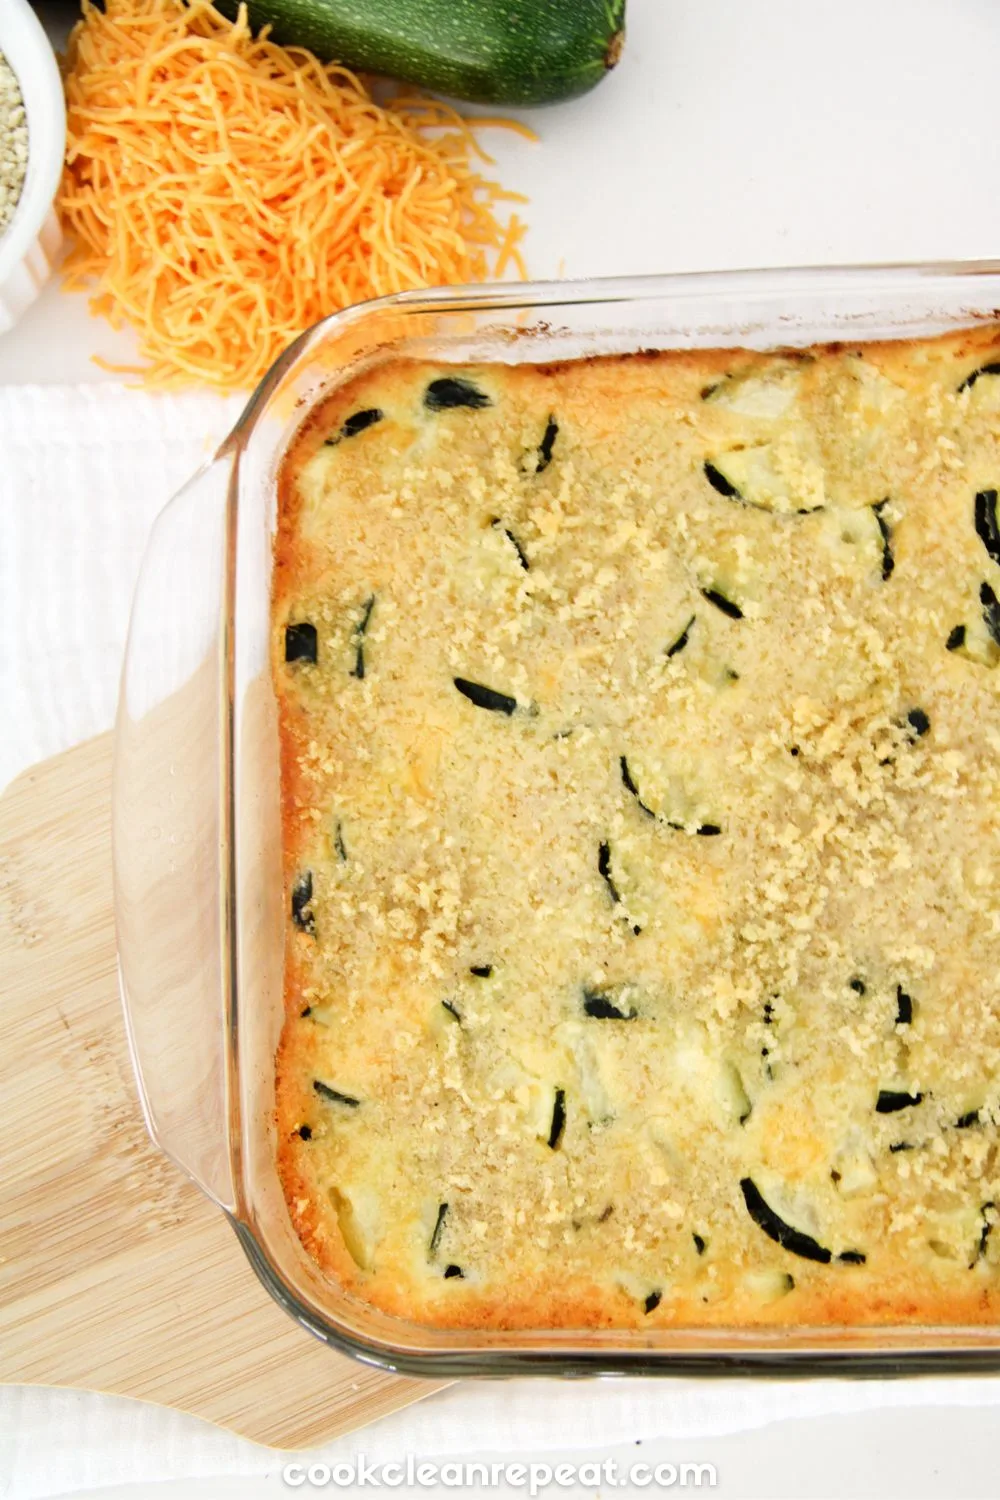 Zucchini Casserole in a casserole dish brown and crispy from being baked